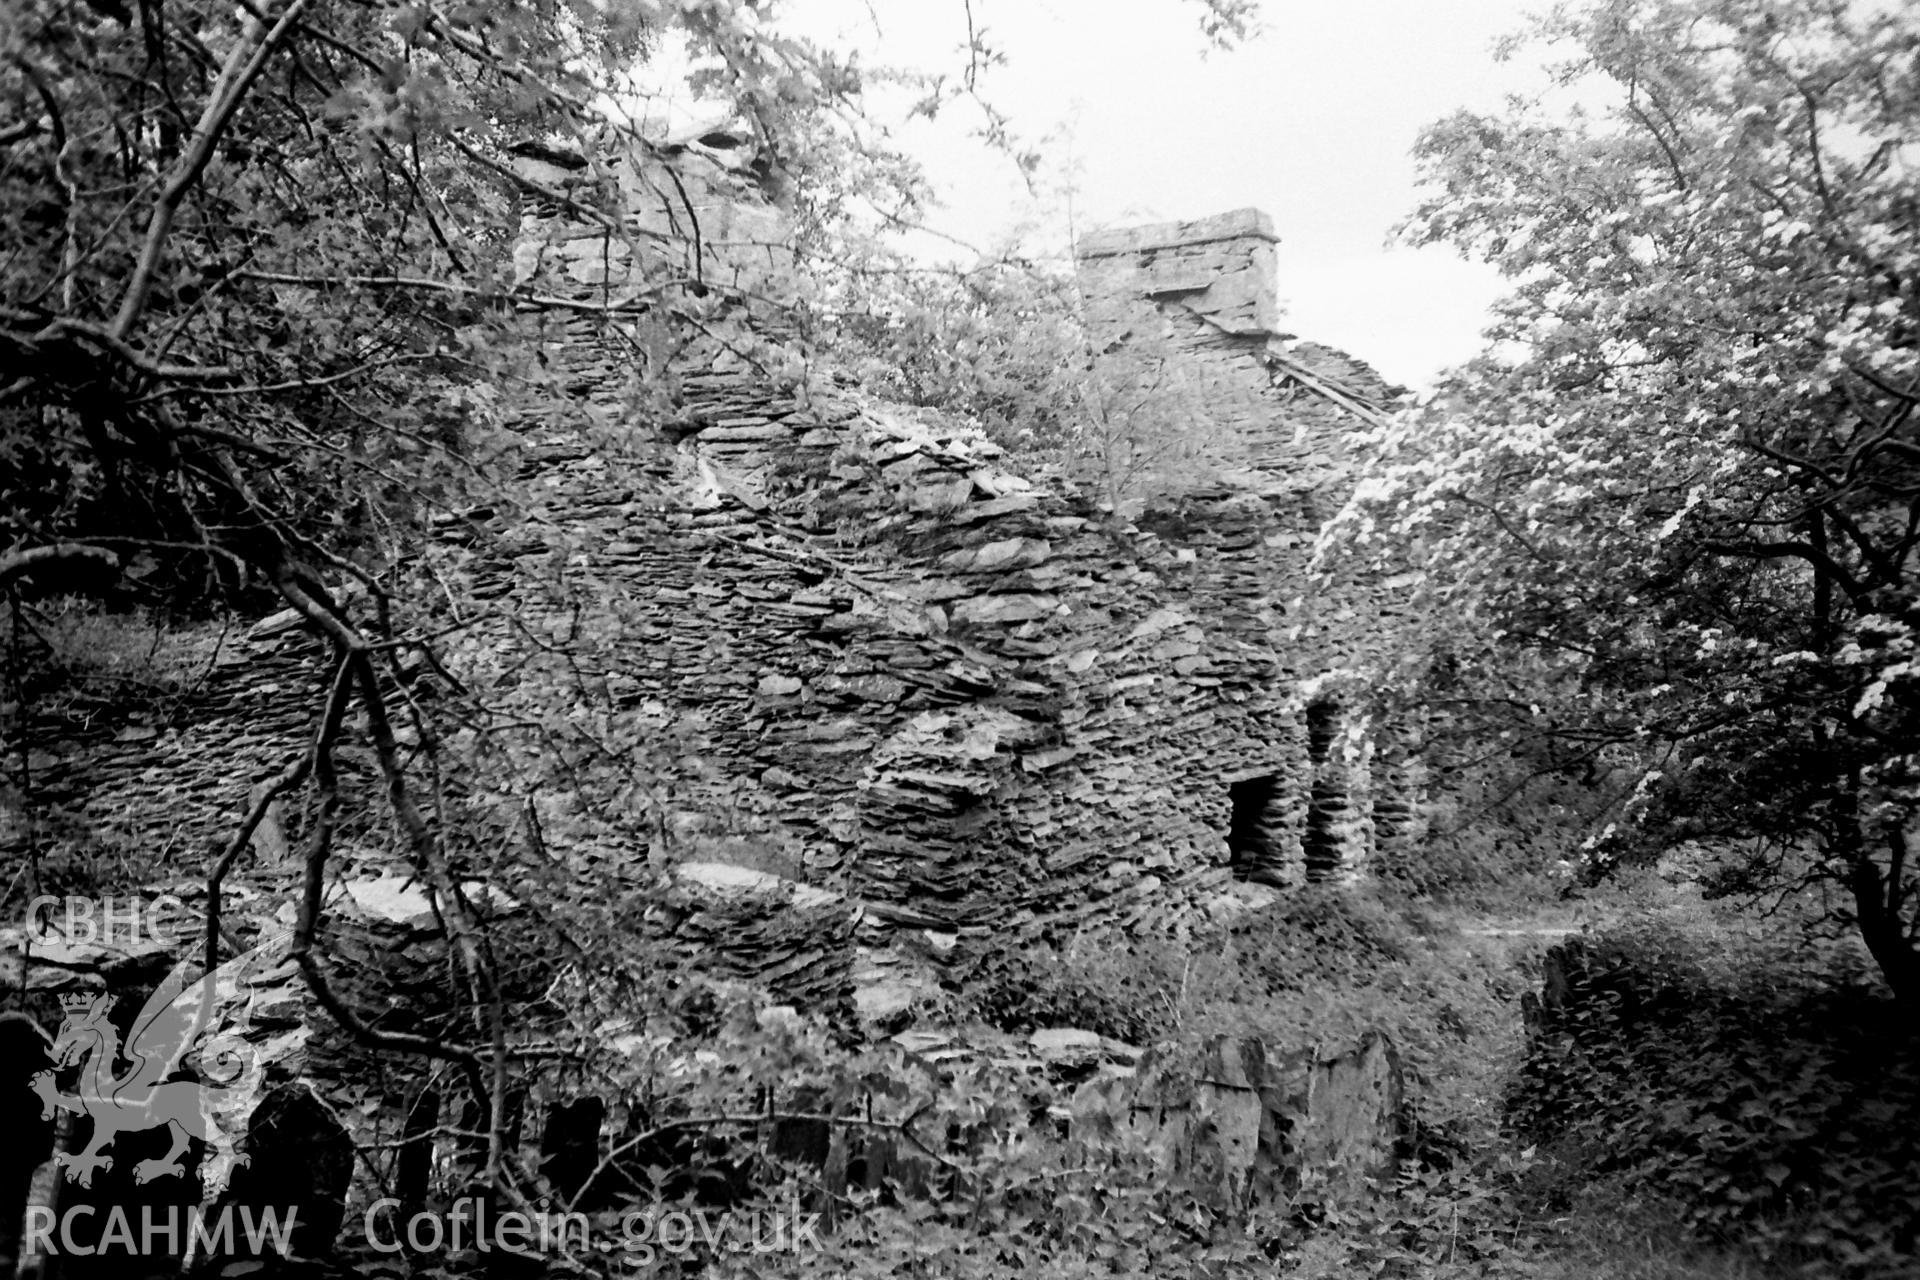 Digitised black and white photograph of abandoned quarrymens cottages at Rhiwddolion. Produced during Bachelor of Architecture dissertation: 'The Form and Architecture of Nineteenth Century Industrial Settlements in Rural Wales' by Martin Davies, 1979.